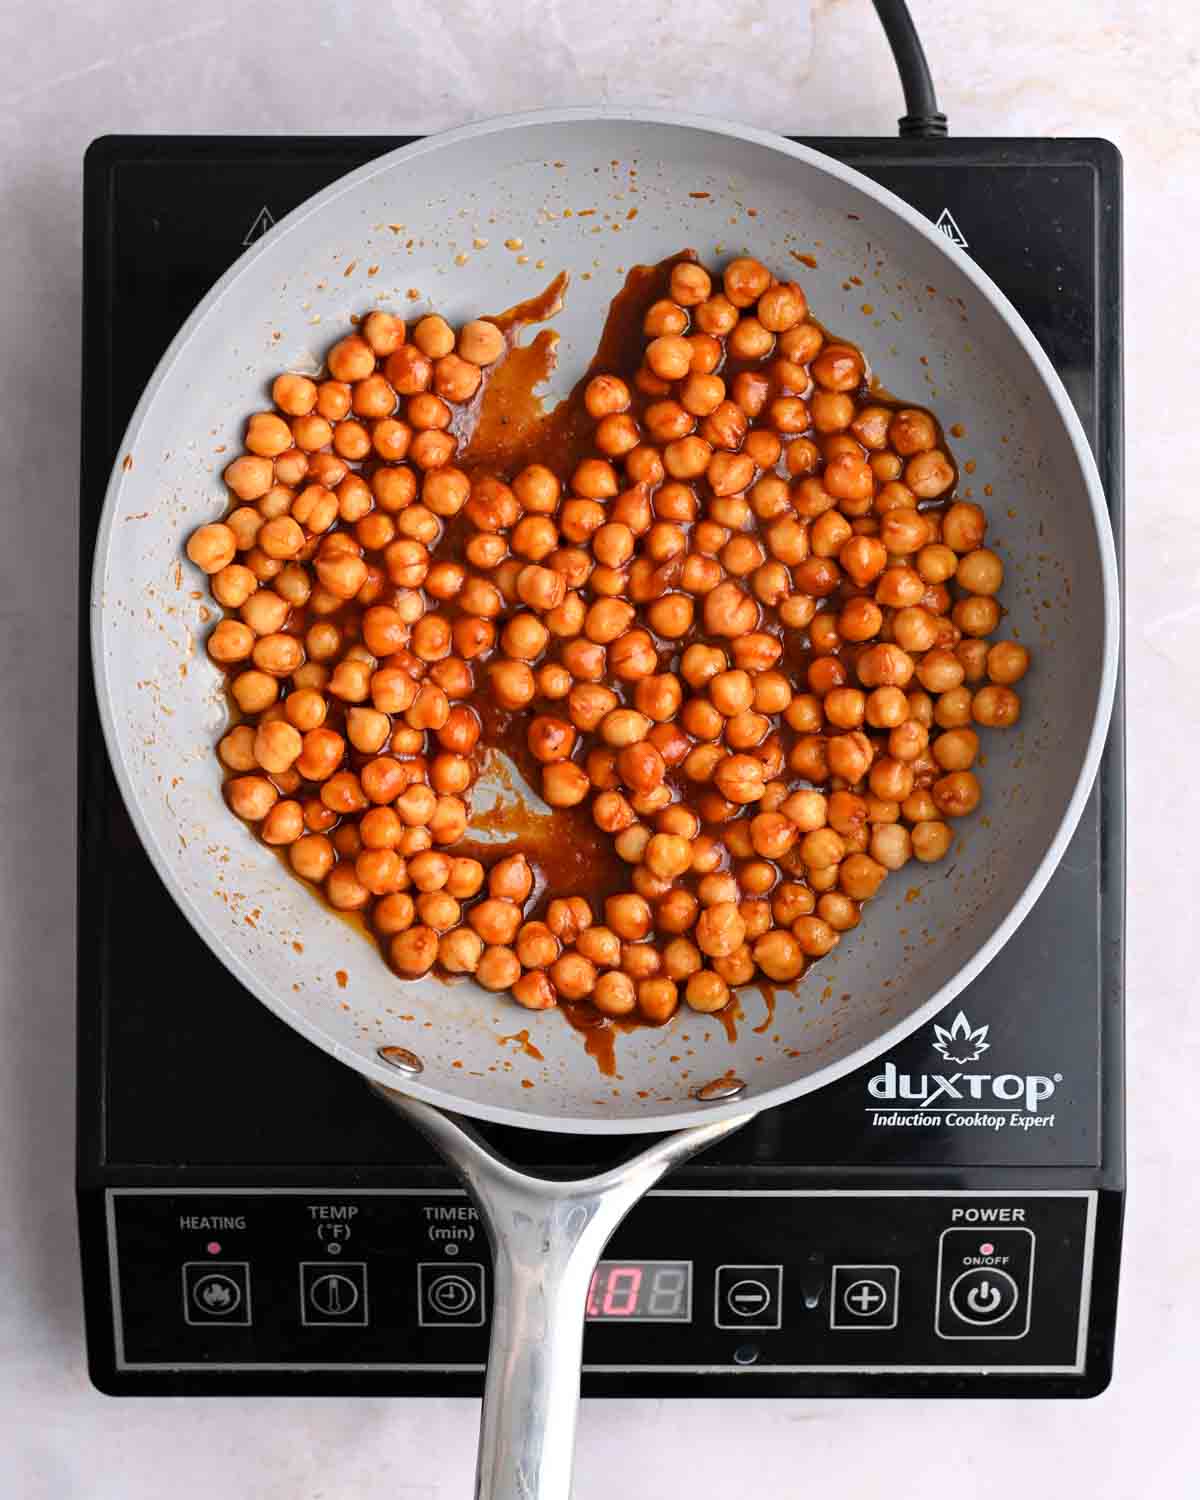 Chickpeas coated in BBQ sauce in a skillet on an induction stove.